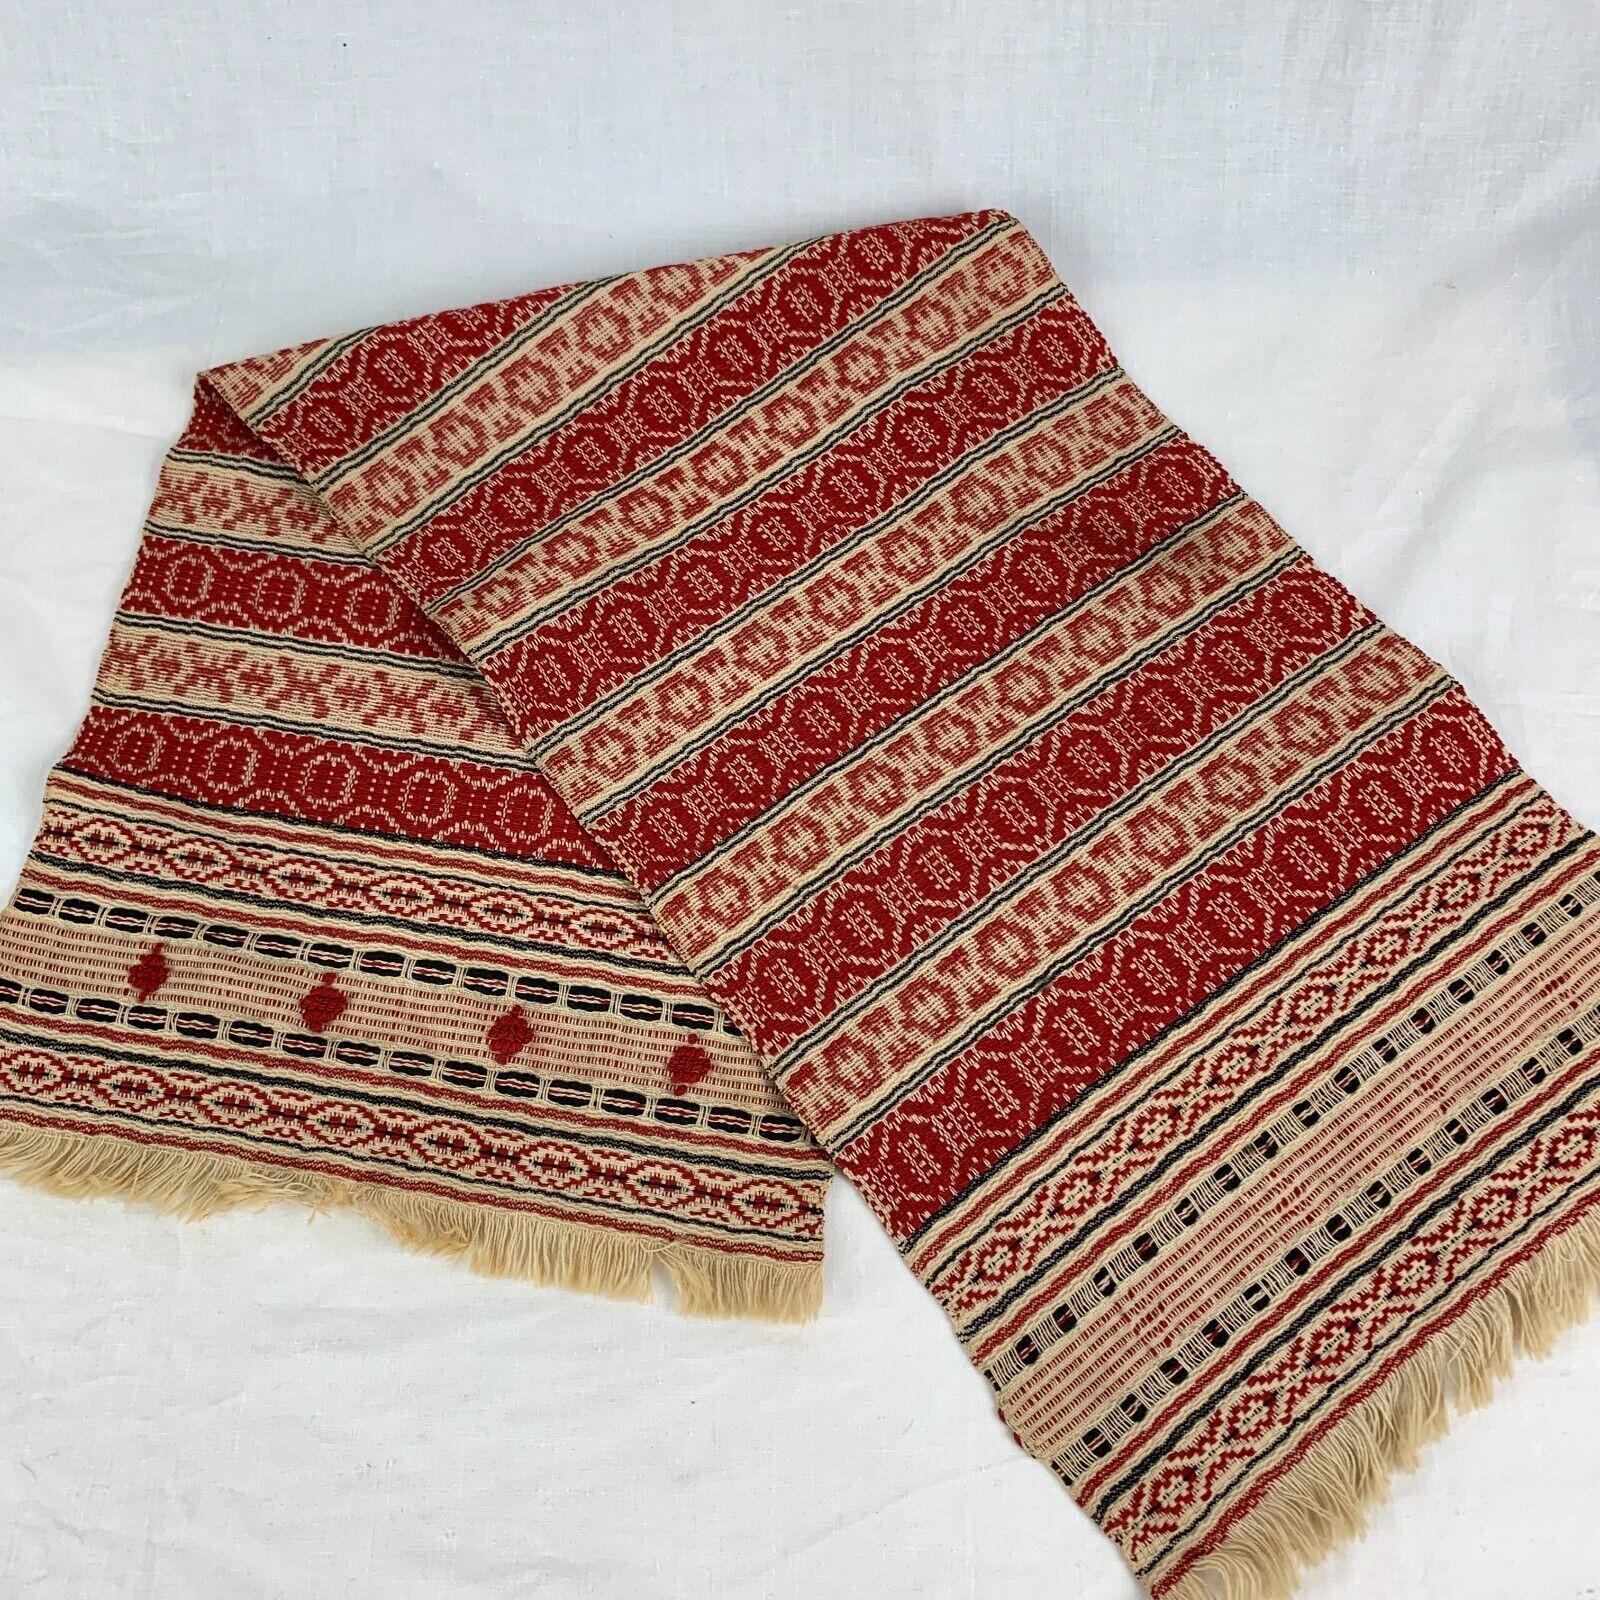 Hand Woven Table Runner Red and Beige Ethnic Geometric Stripes Excellent